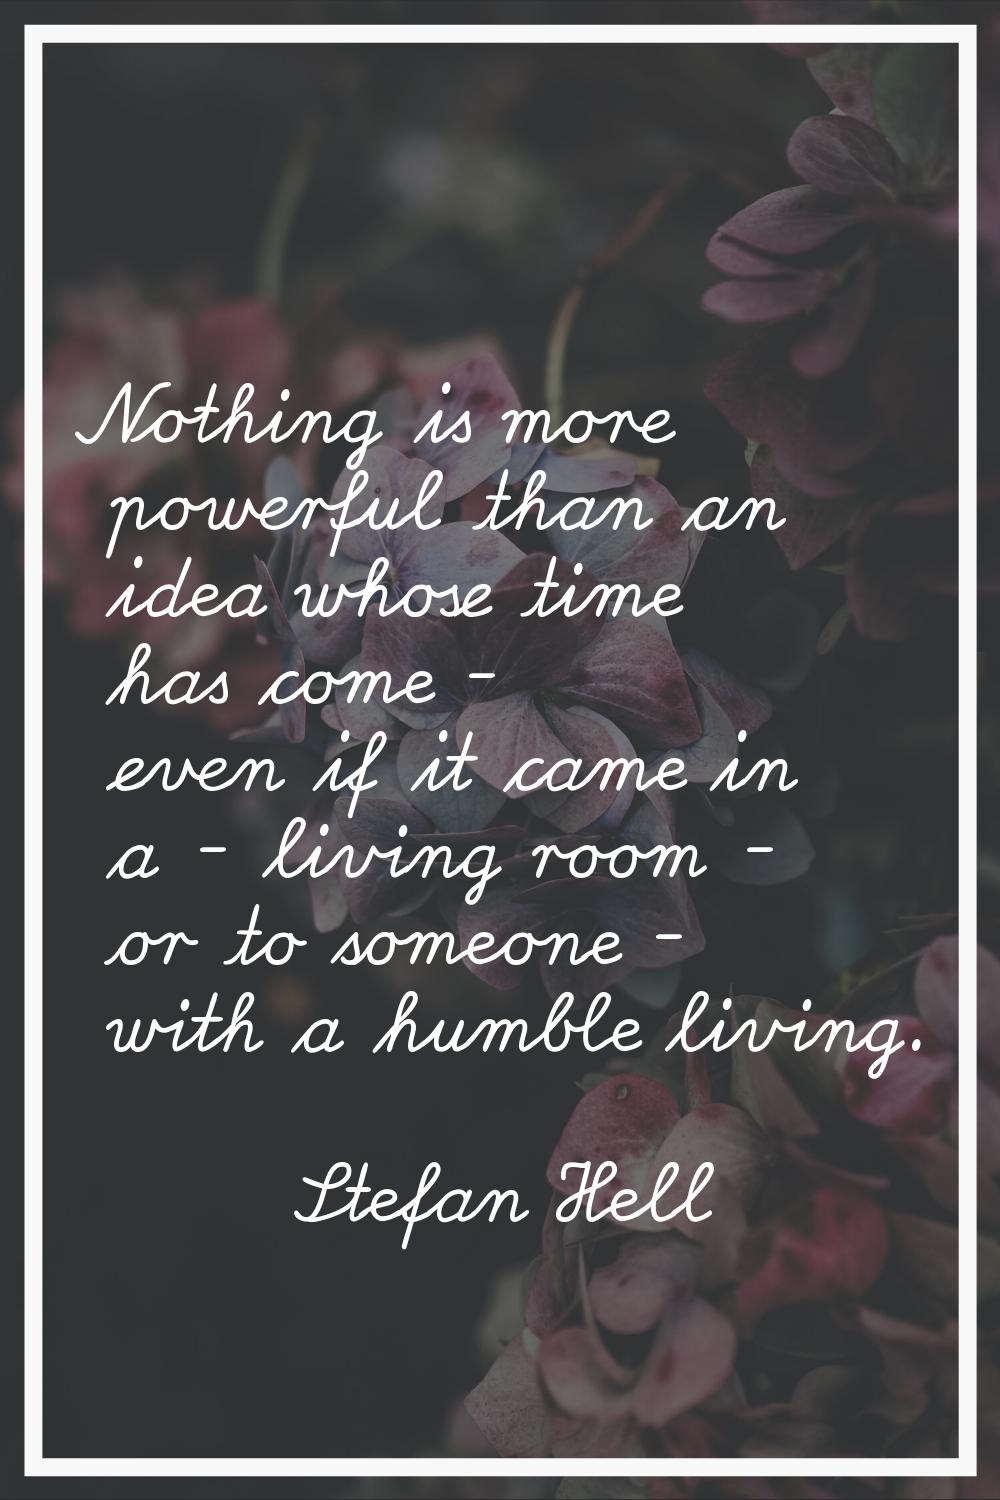 Nothing is more powerful than an idea whose time has come - even if it came in a - living room - or